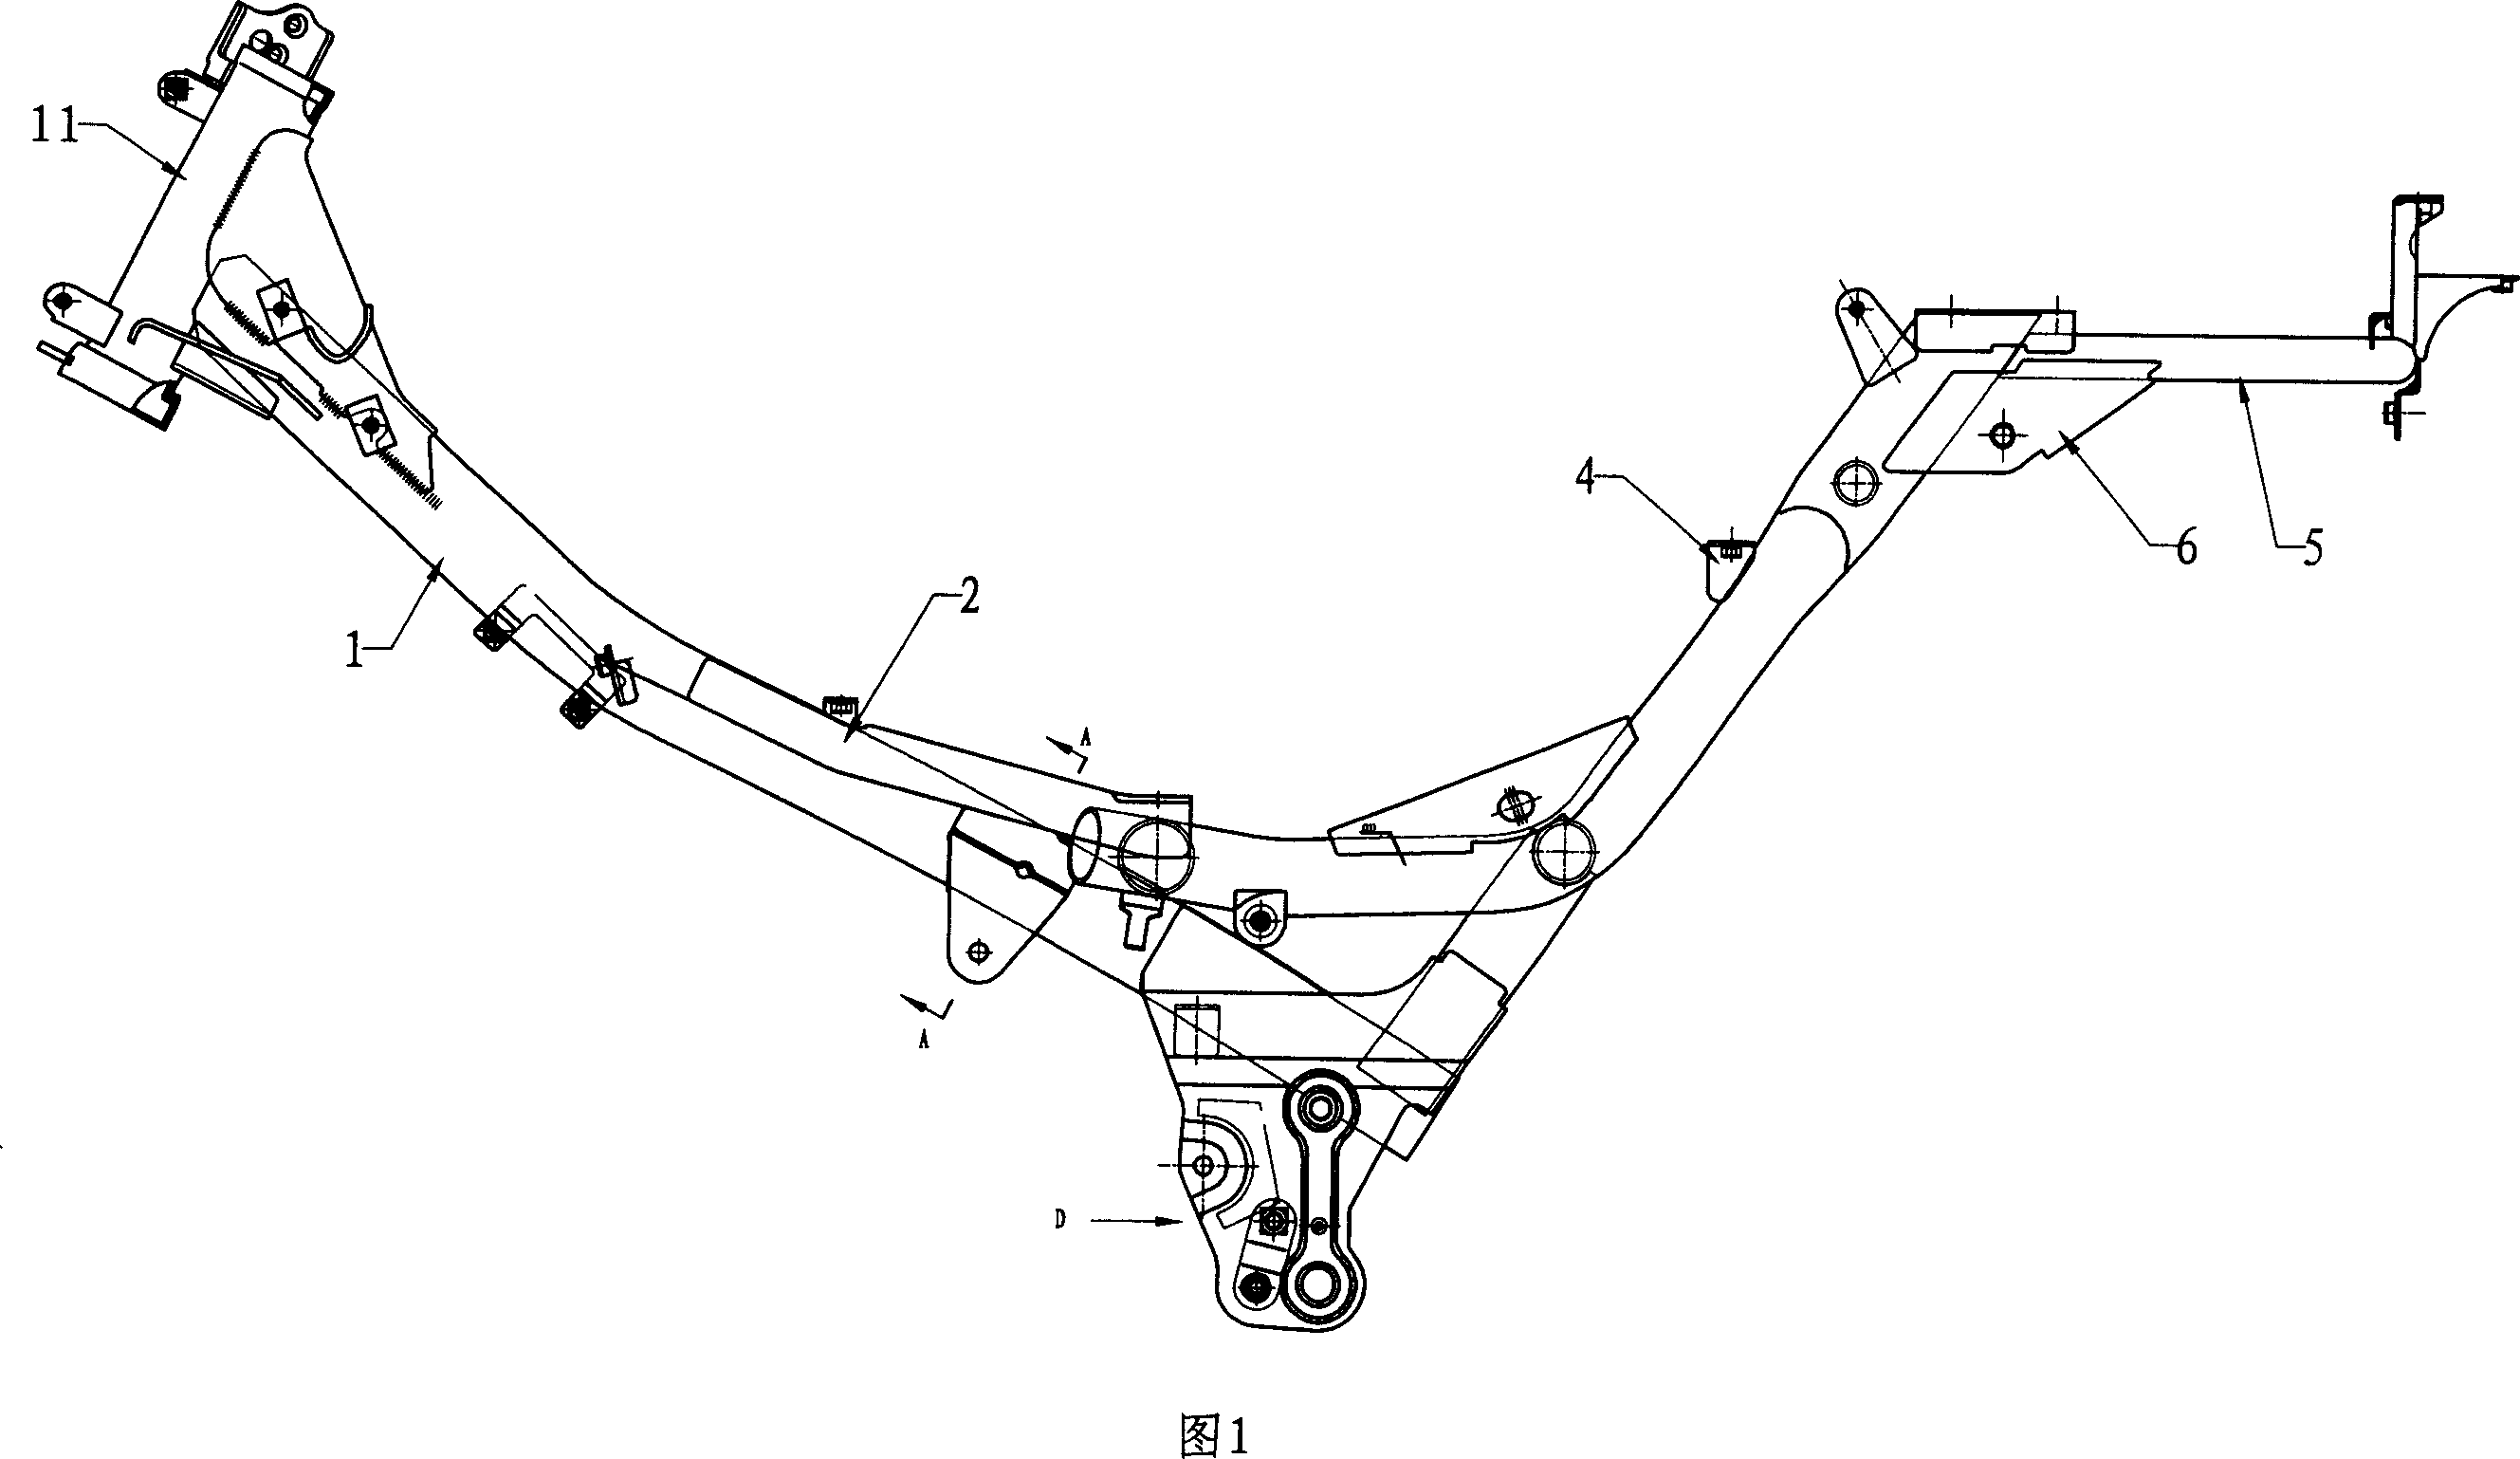 Bent-beam motorcycle frame with large helmet case